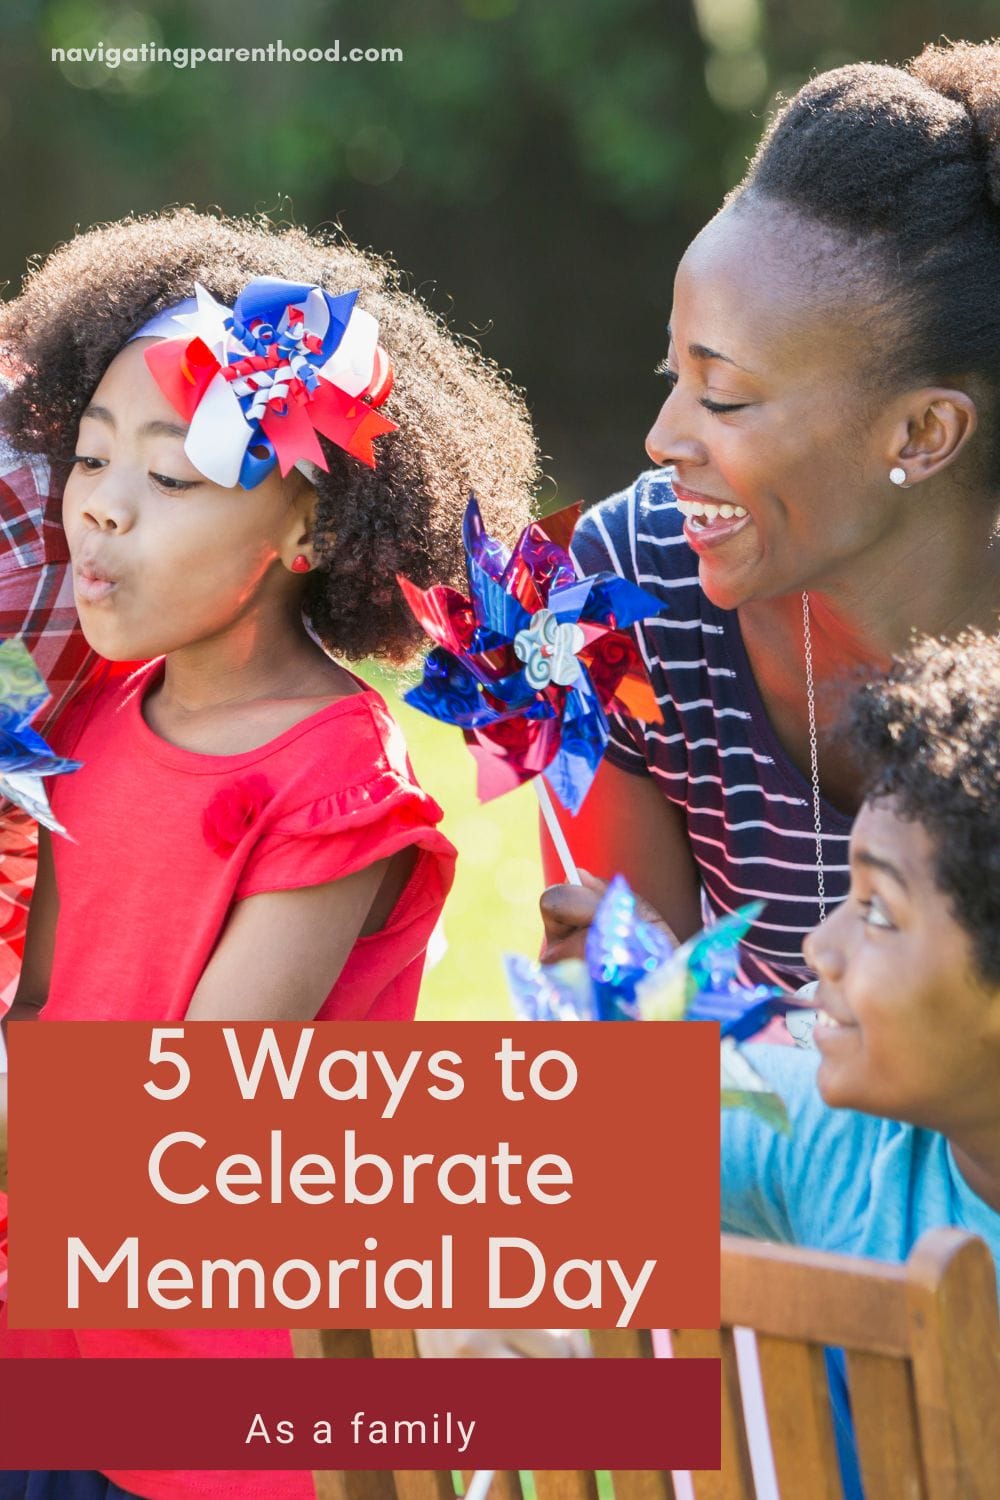 5 Ways to Celebrate Memorial Day as a Family